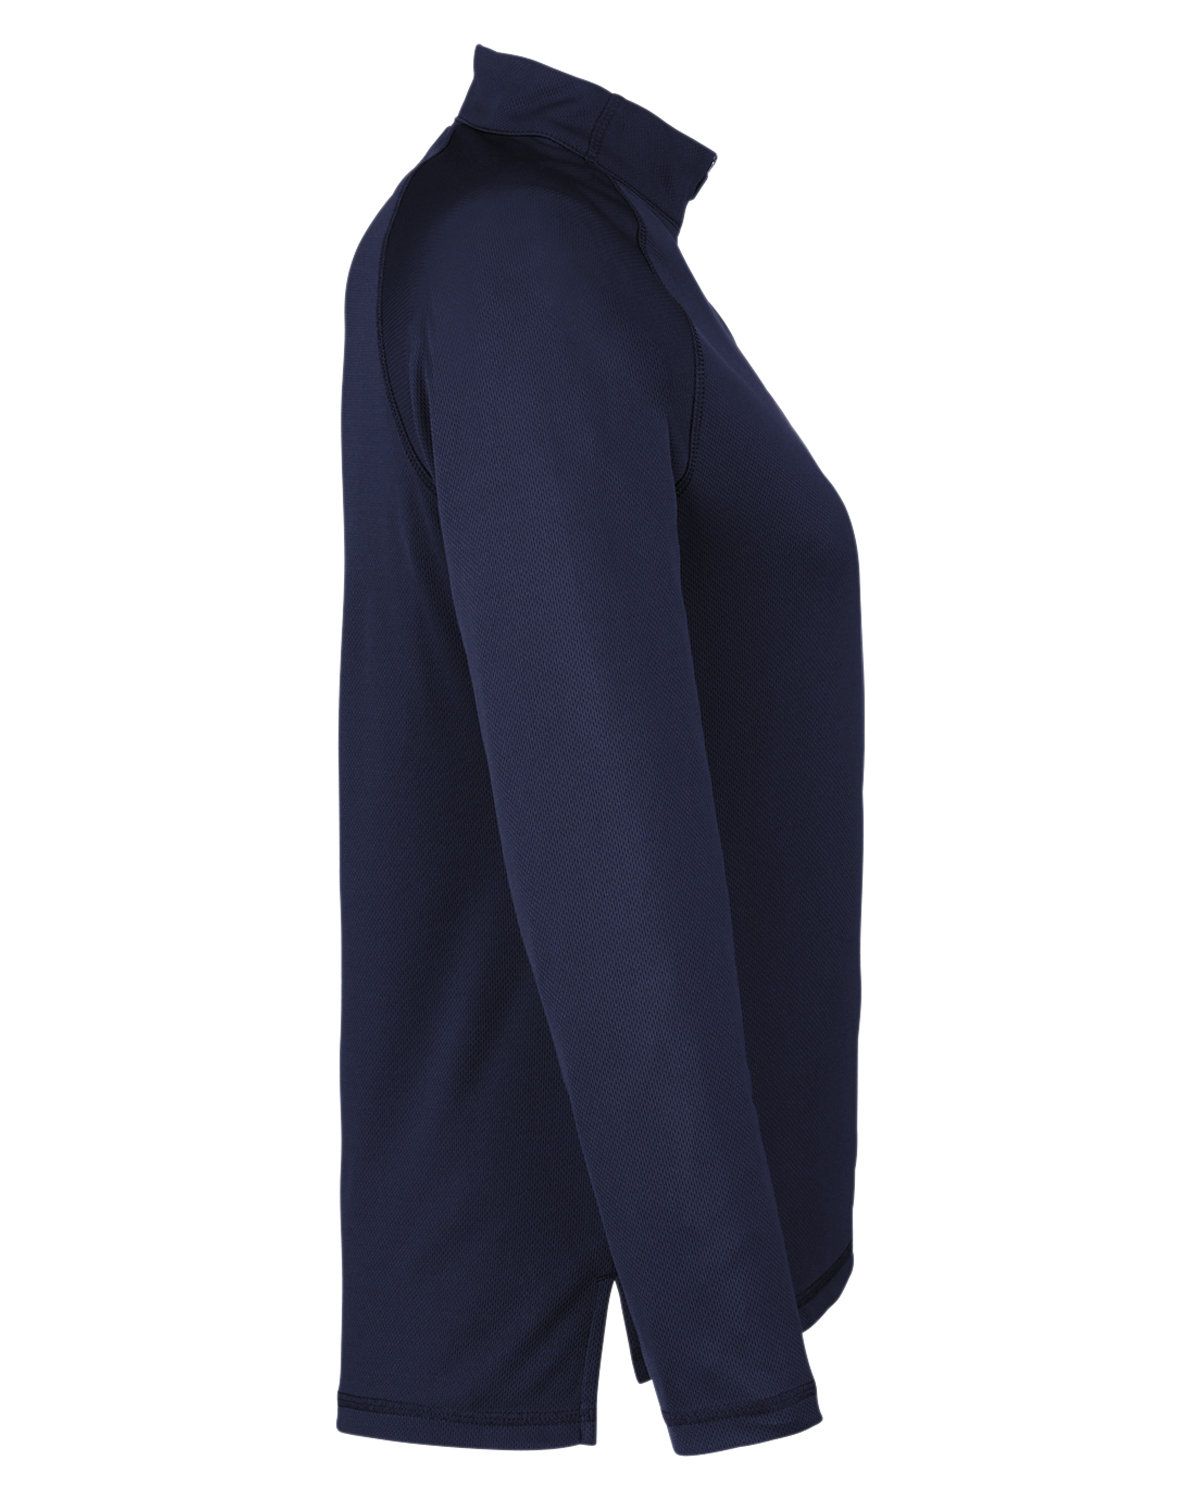 North End Ladies' Revive coolcore® Quarter-Zip | alphabroder Canada